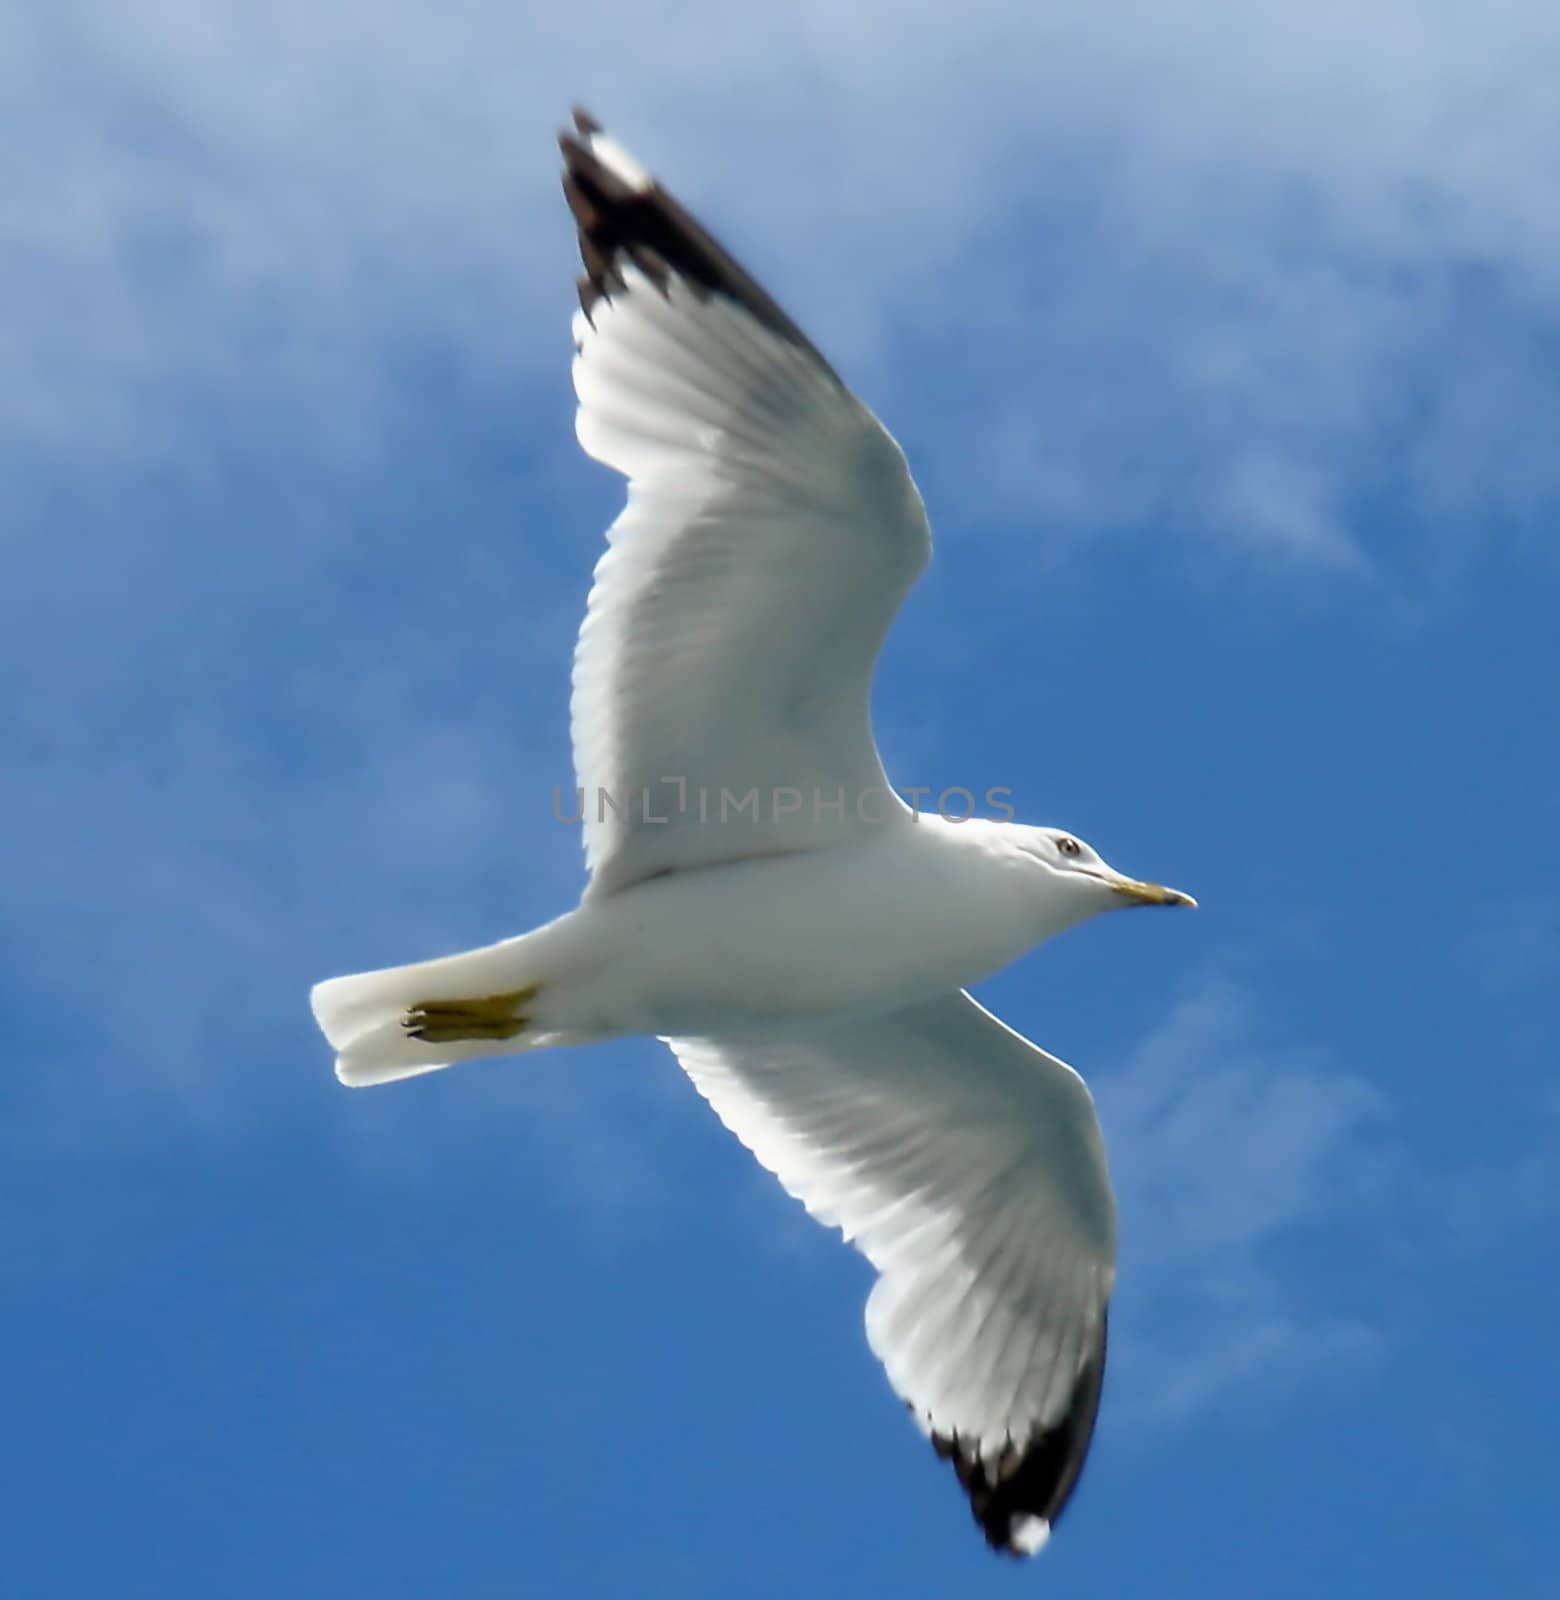 Close up of a white seagull flying in a blue sky with little clouds